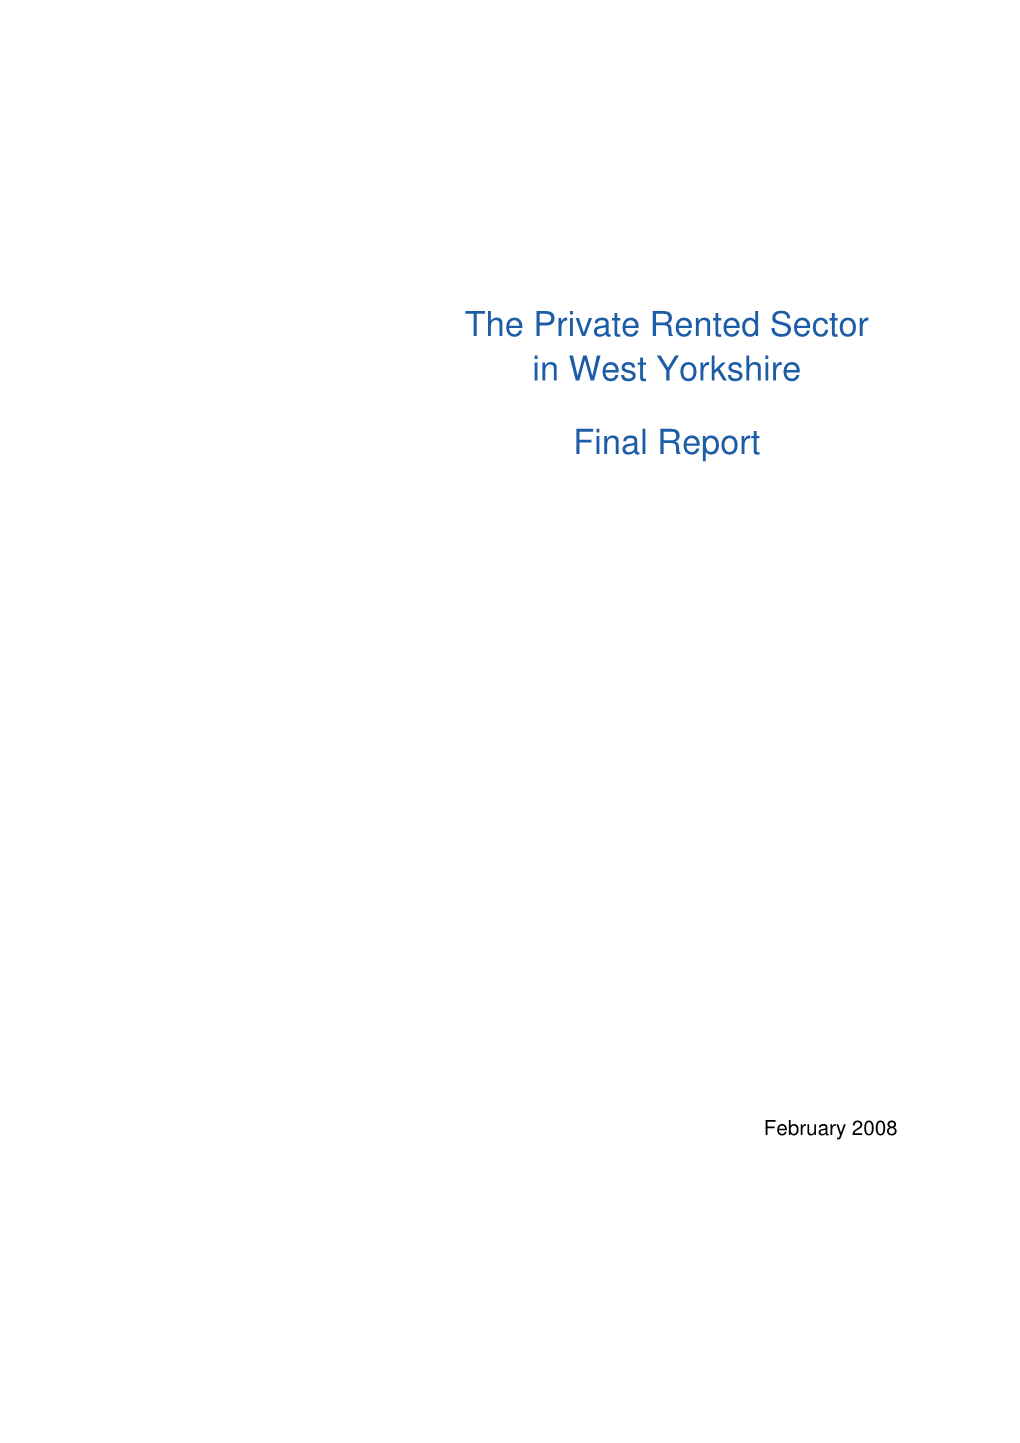 The Private Rented Sector in West Yorkshire Final Report